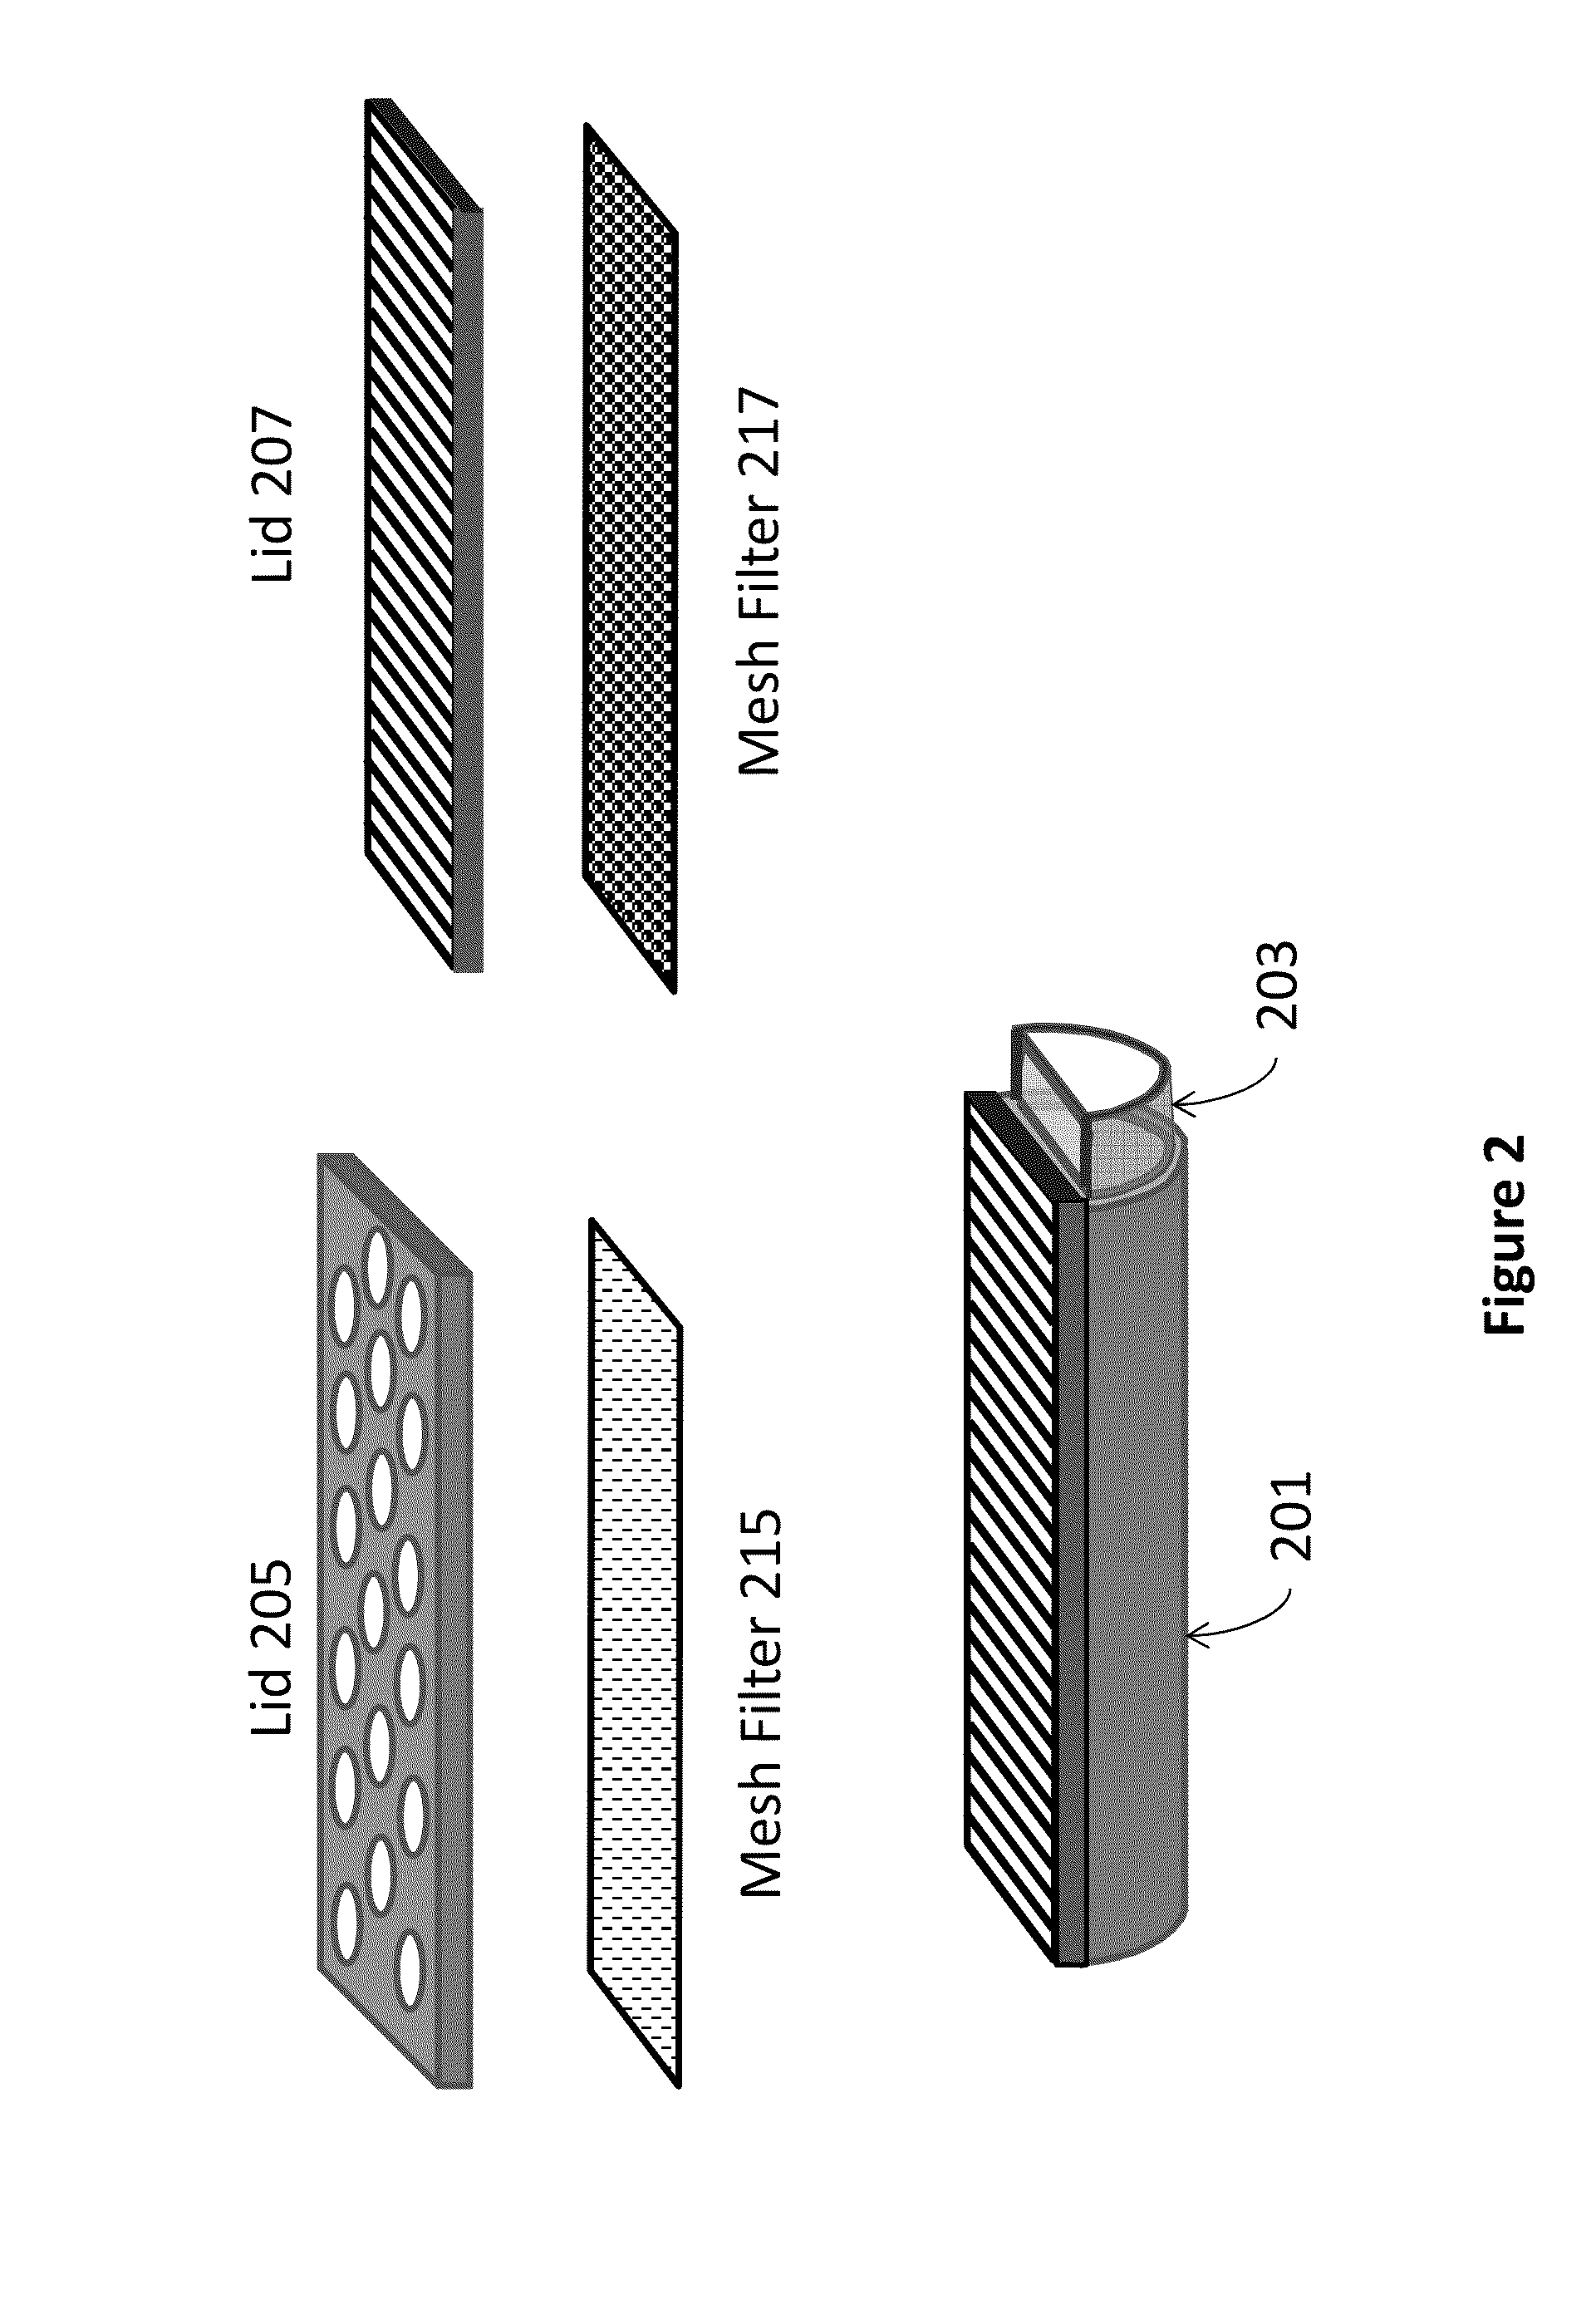 Method and System for Water Reclamation, Purification, and Reuse for Residential, Commercial, and Agricultural Applications